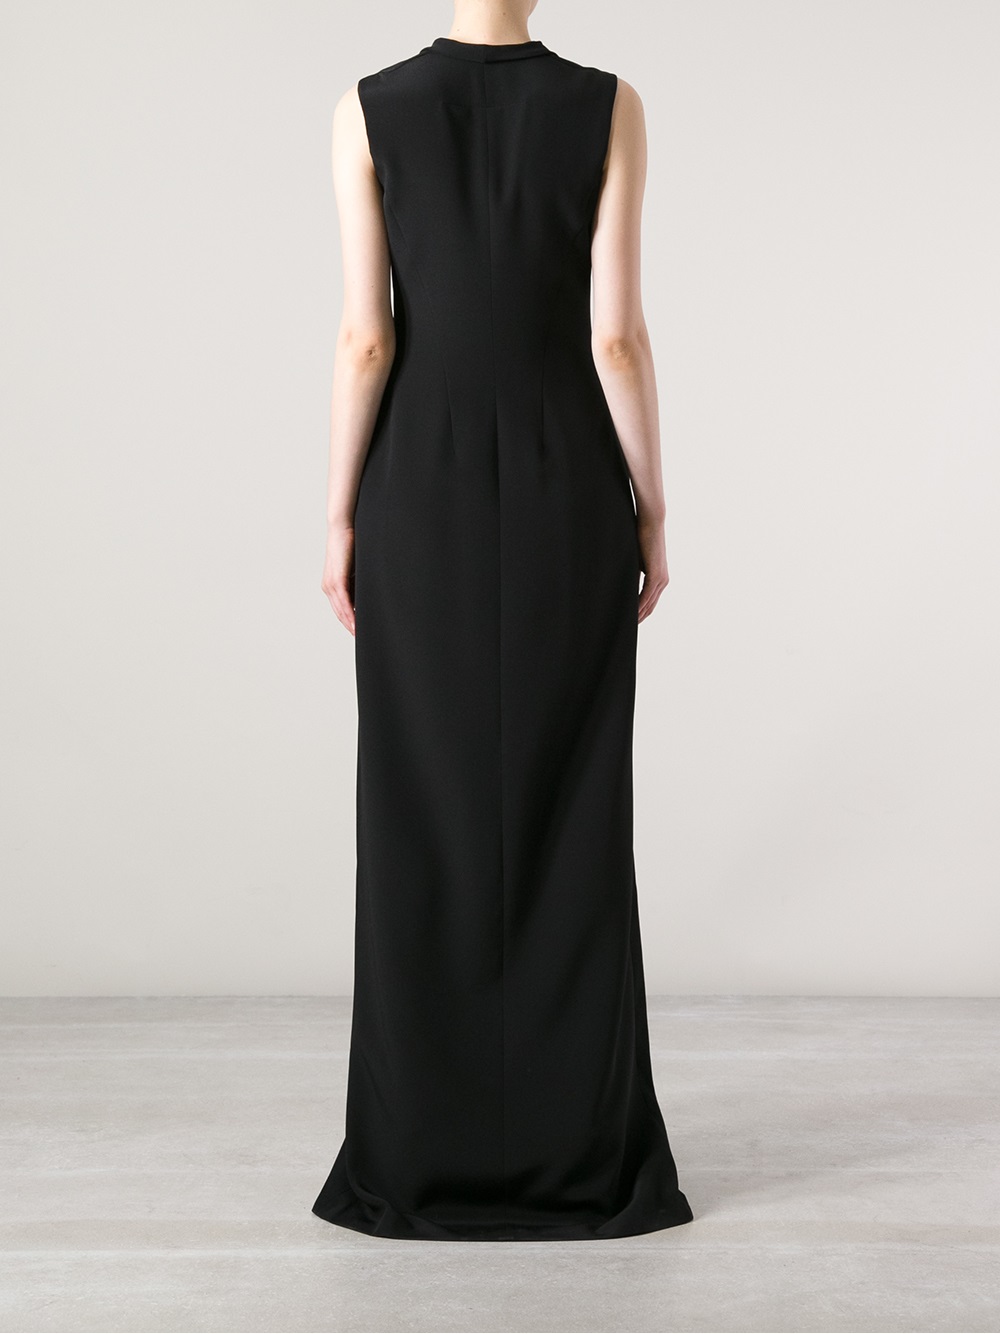 Givenchy Givenchy Sleeveless Dress in Black - Lyst